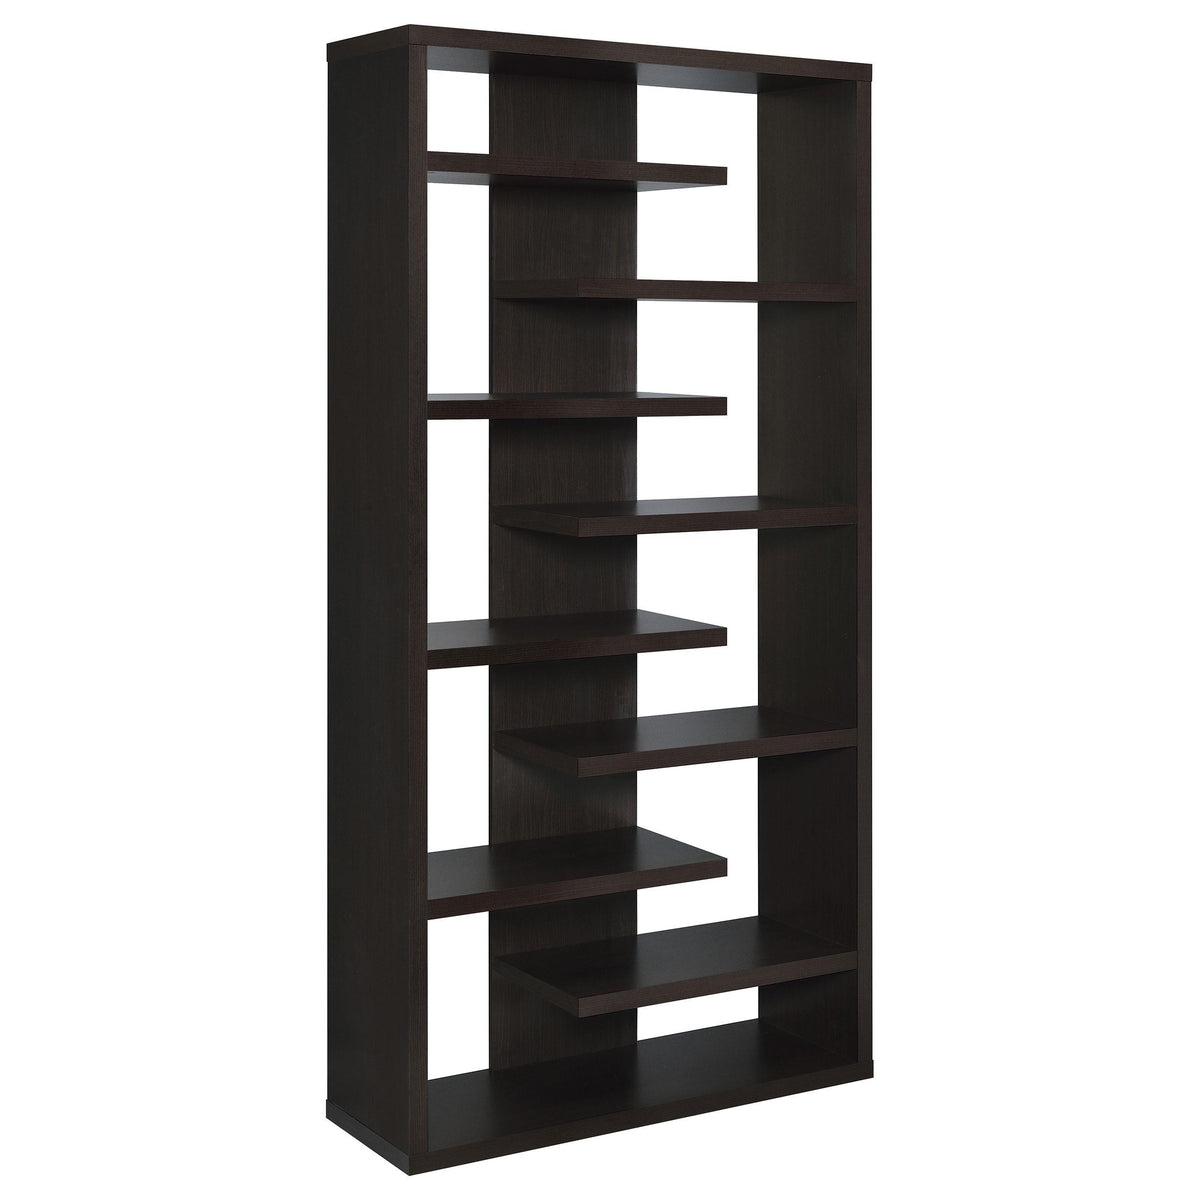 Altmark Bookcase with Staggered Floating Shelves Cappuccino Altmark Bookcase with Staggered Floating Shelves Cappuccino Half Price Furniture